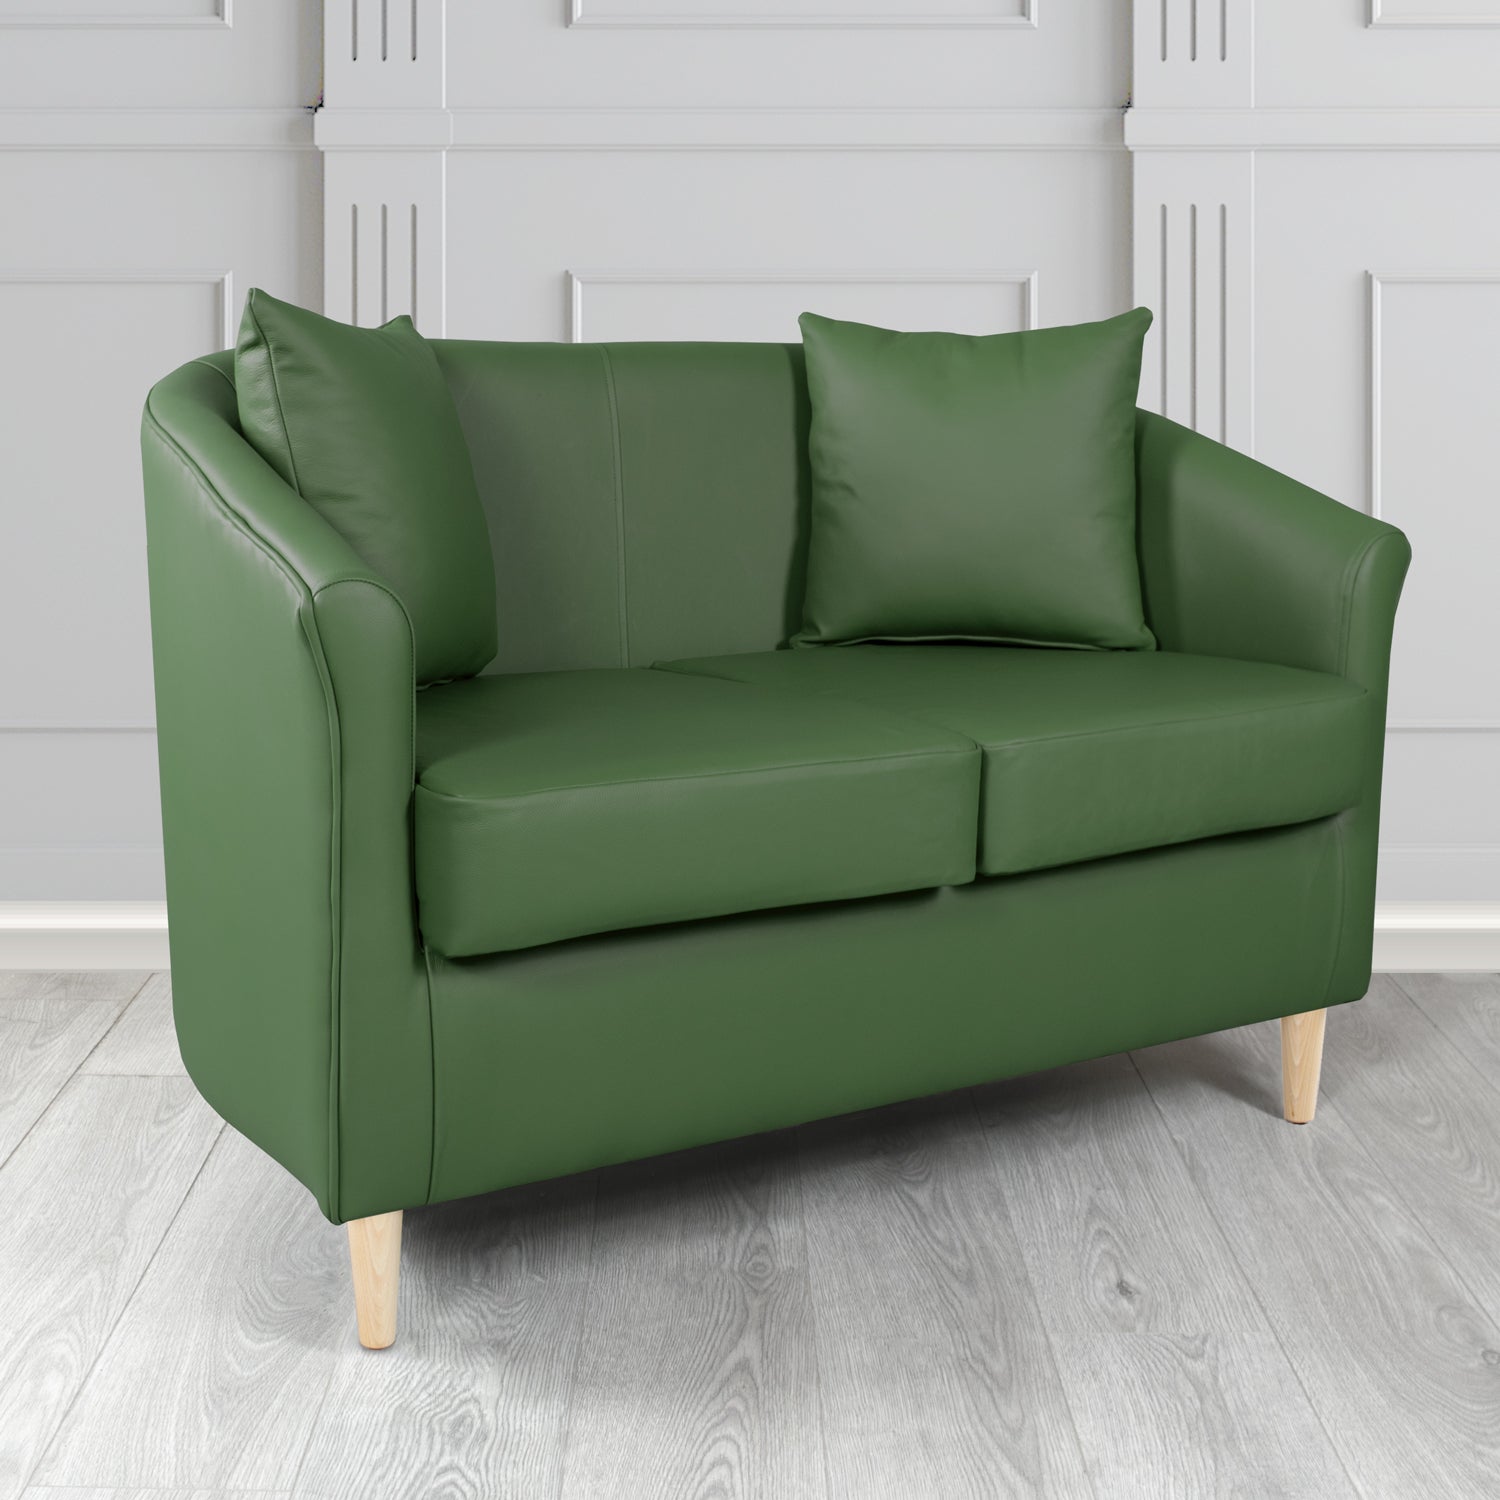 St Tropez Shelly Forest Green Crib 5 Genuine Leather 2 Seater Tub Sofa with Scatter Cushions - The Tub Chair Shop